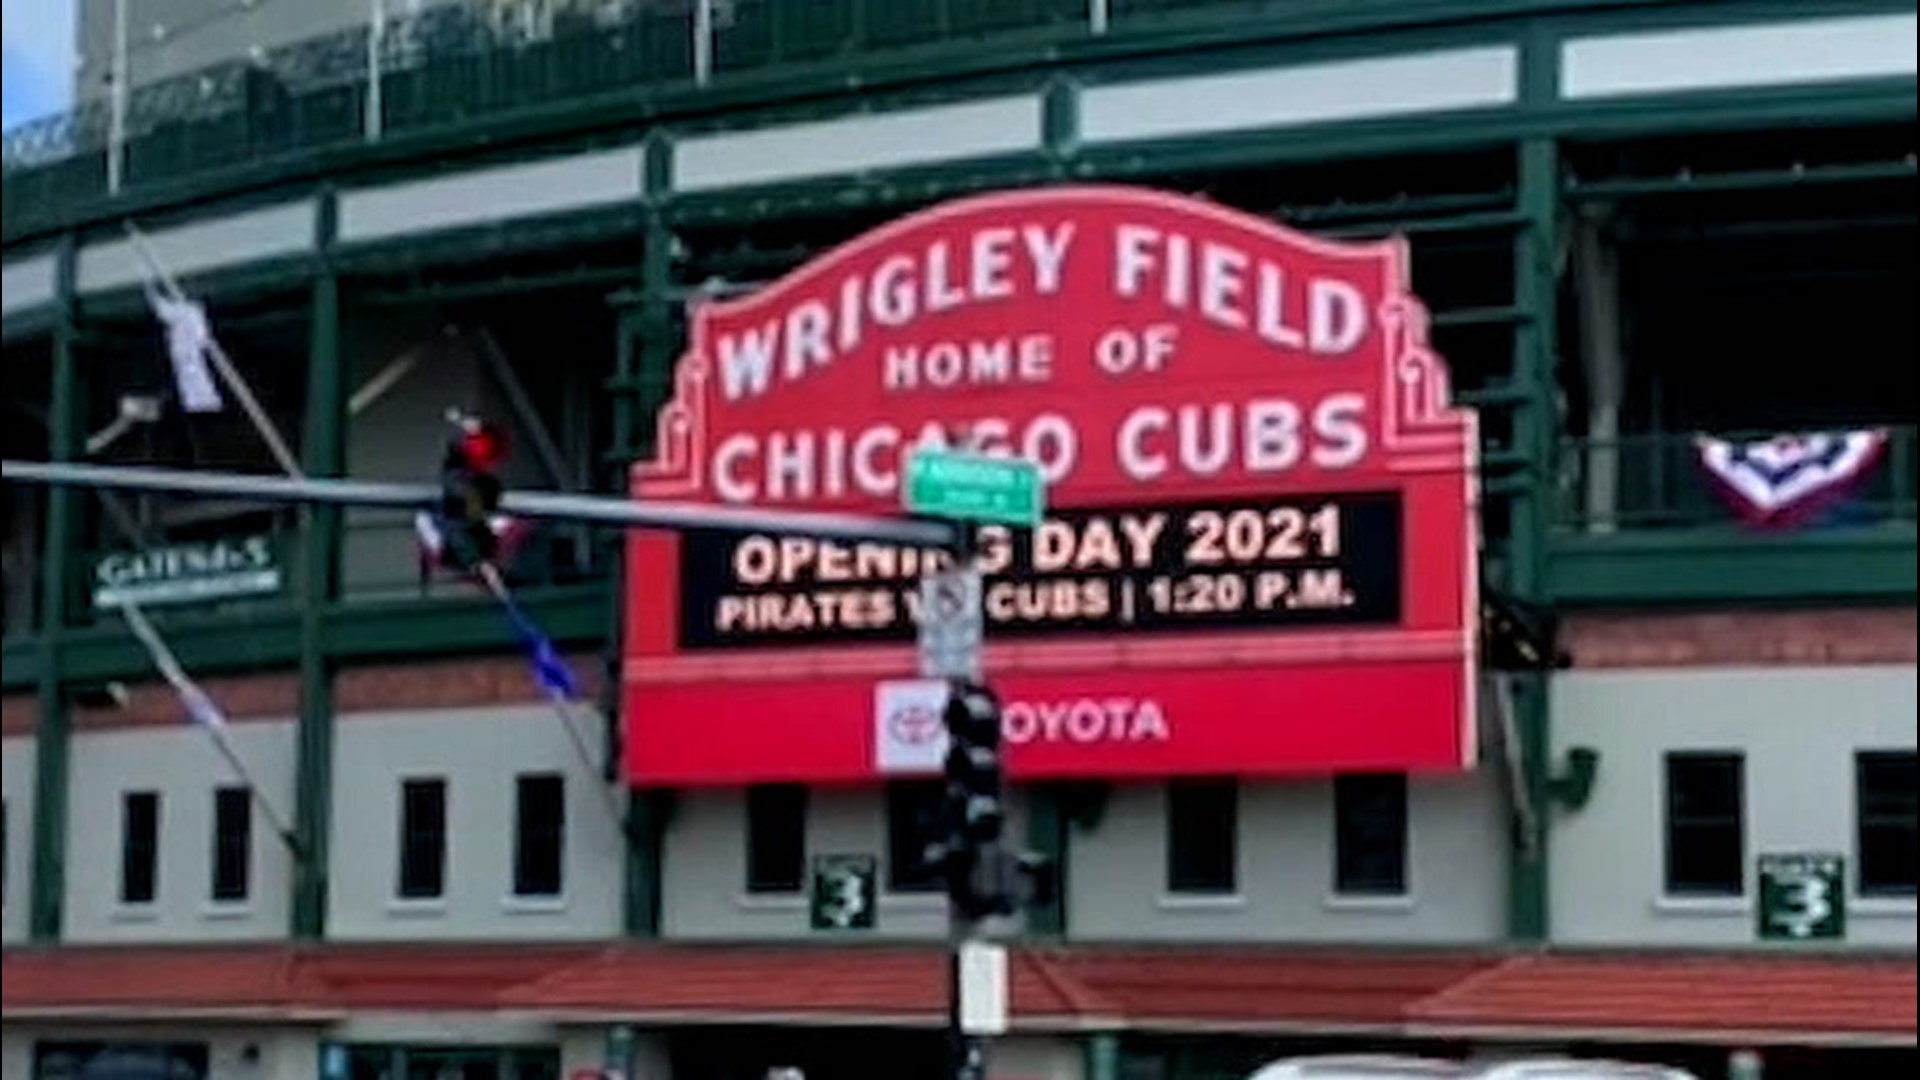 Passion warms Cubs fans on chilly opening day - Chicago Sun-Times